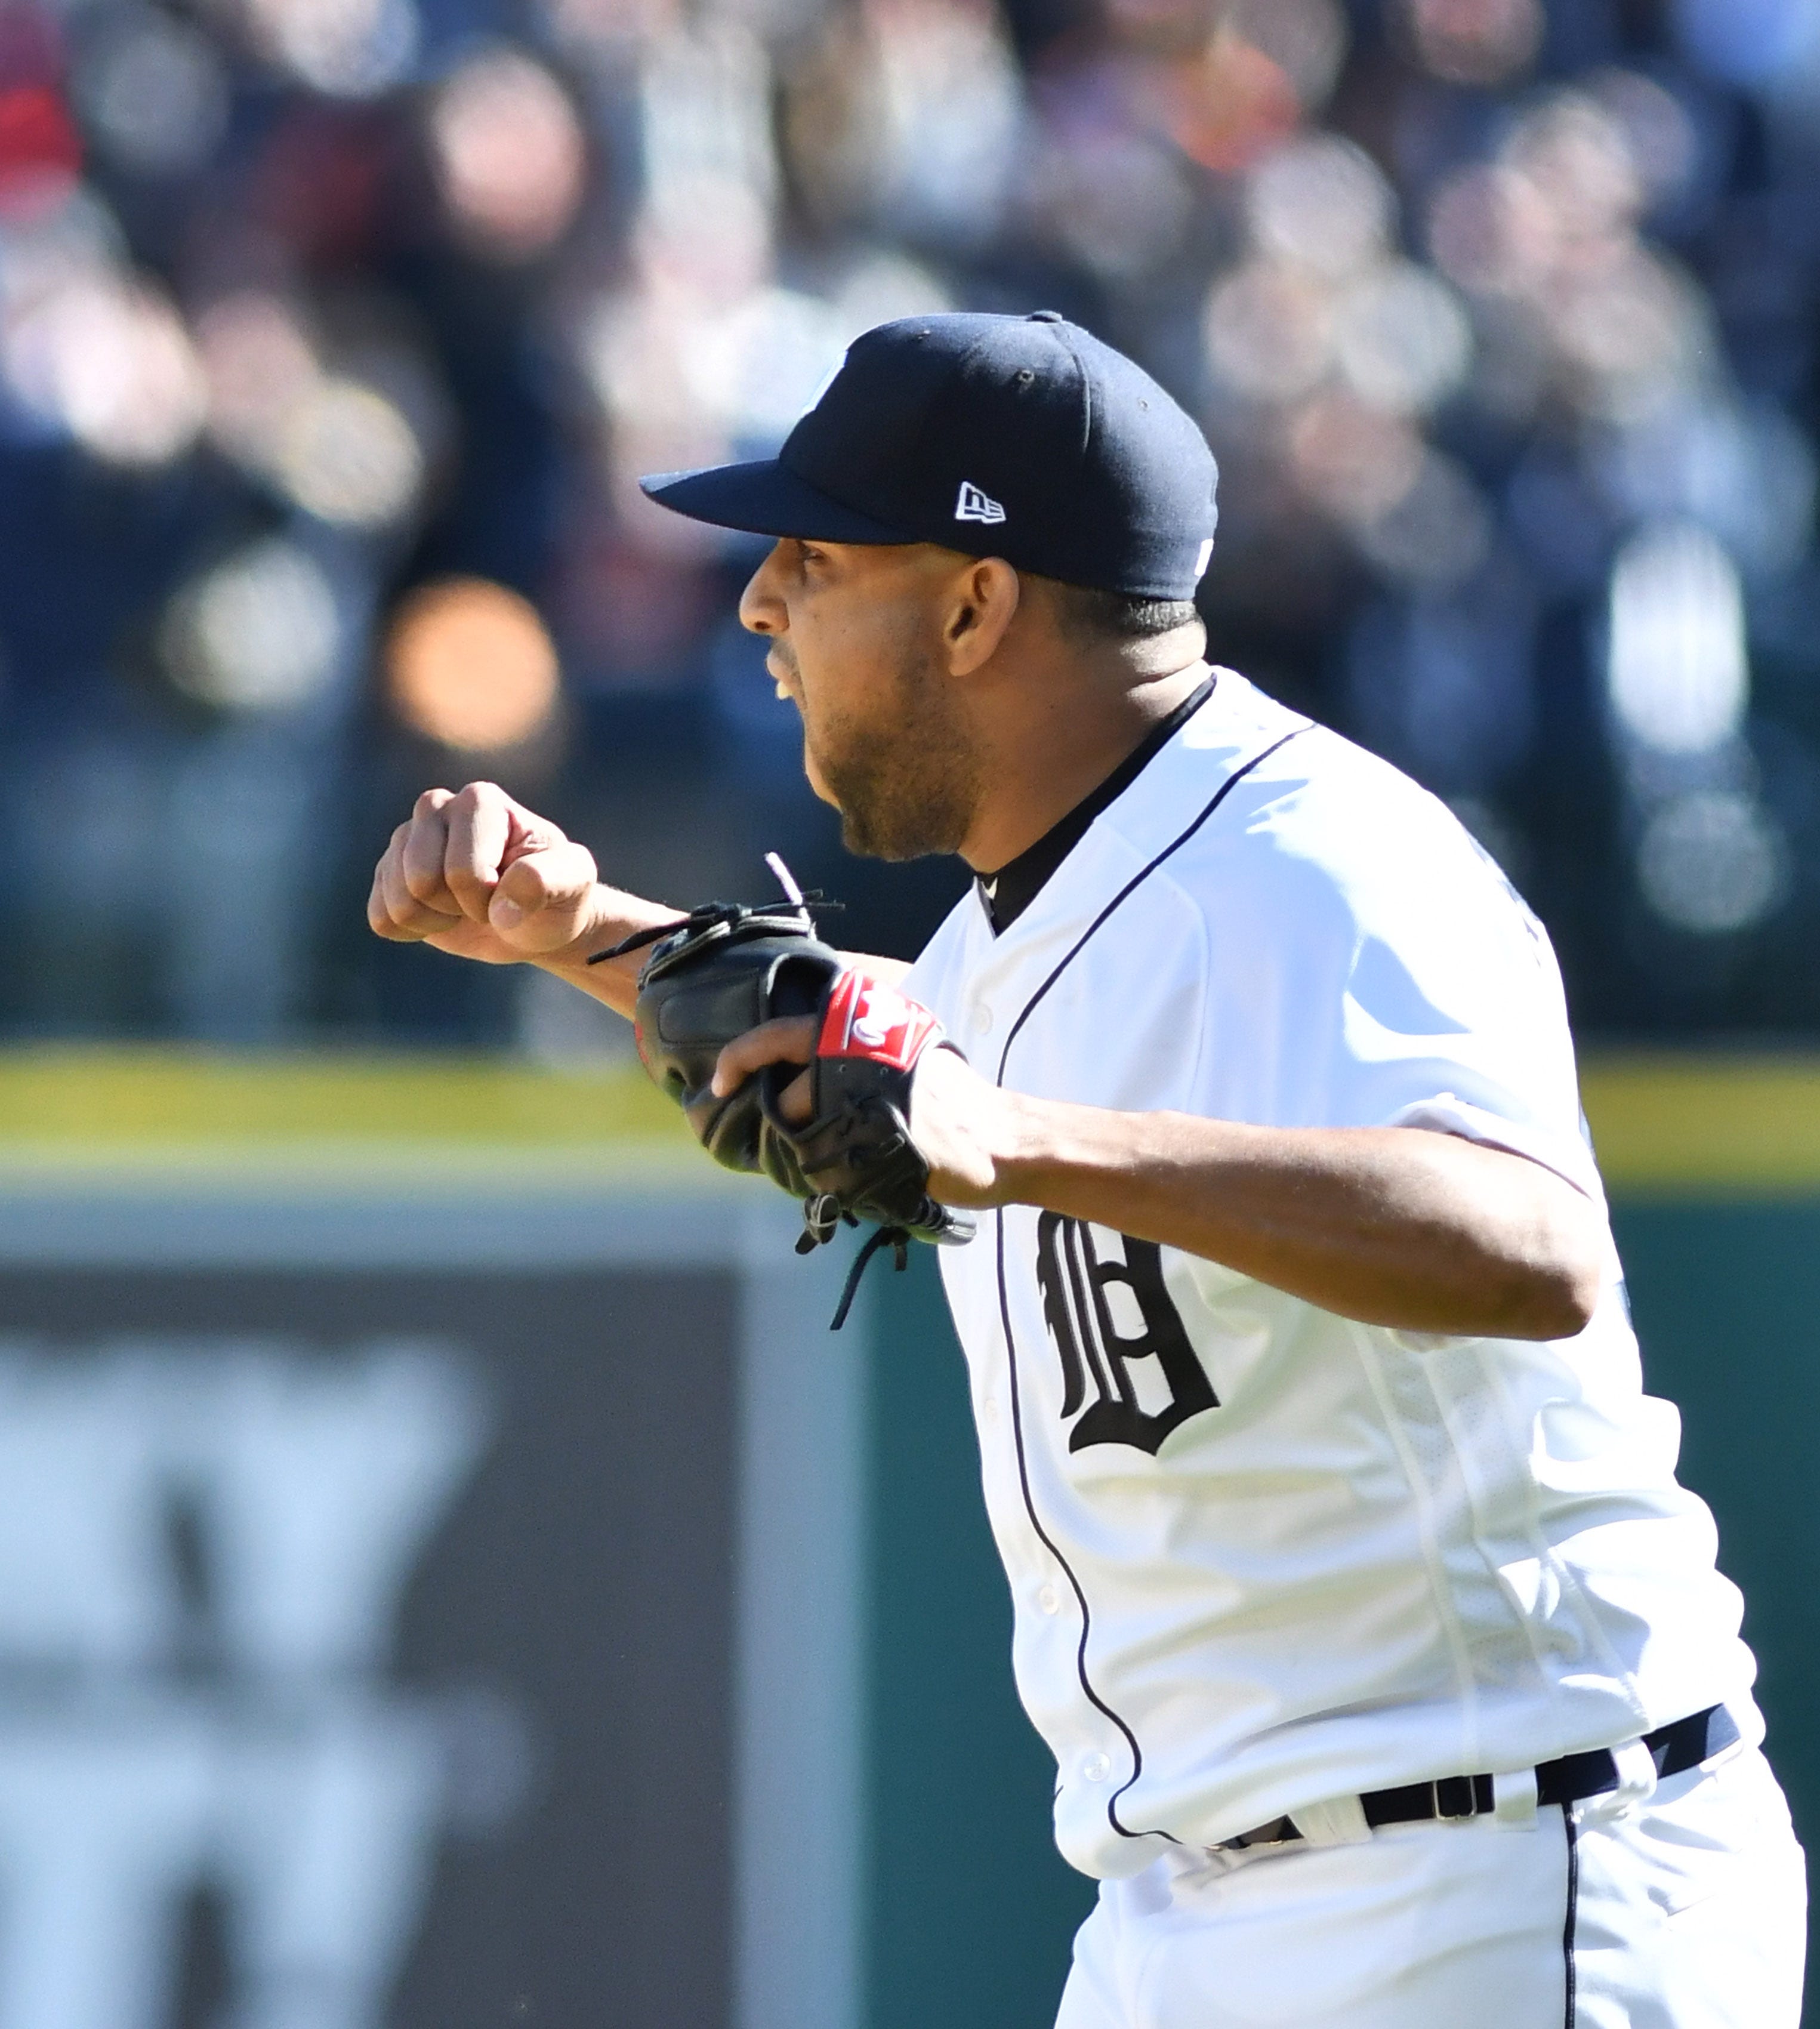 Tigers pitcher Francisco Rodriguez celebrates the win. Detroit Tigers vs Boston Red Sox at Tigers Opening Day at Comerica Park in Detroit on April 7, 2017. Tigers win, 6-5.